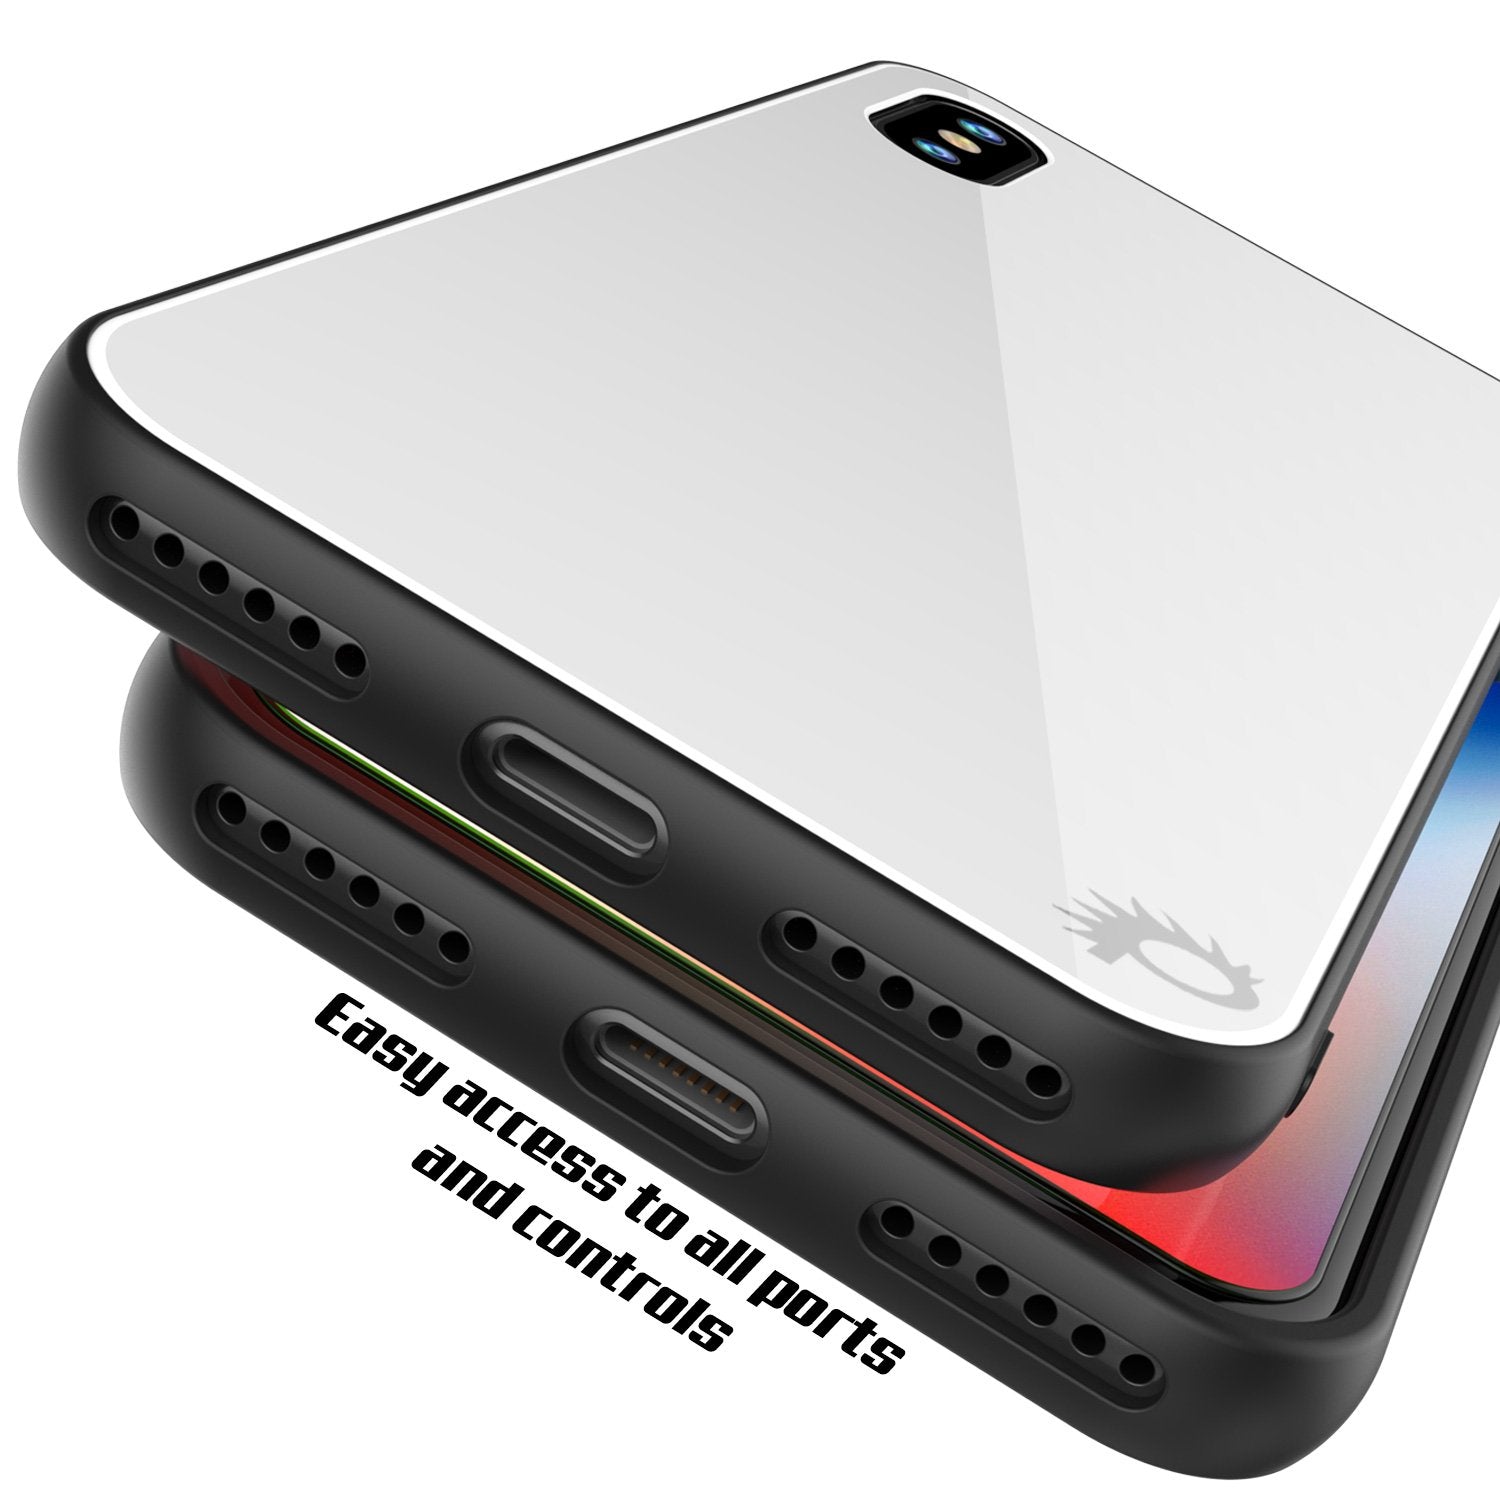 iPhone X Case, Punkcase GlassShield Ultra Thin Protectiv Cover, WHITE